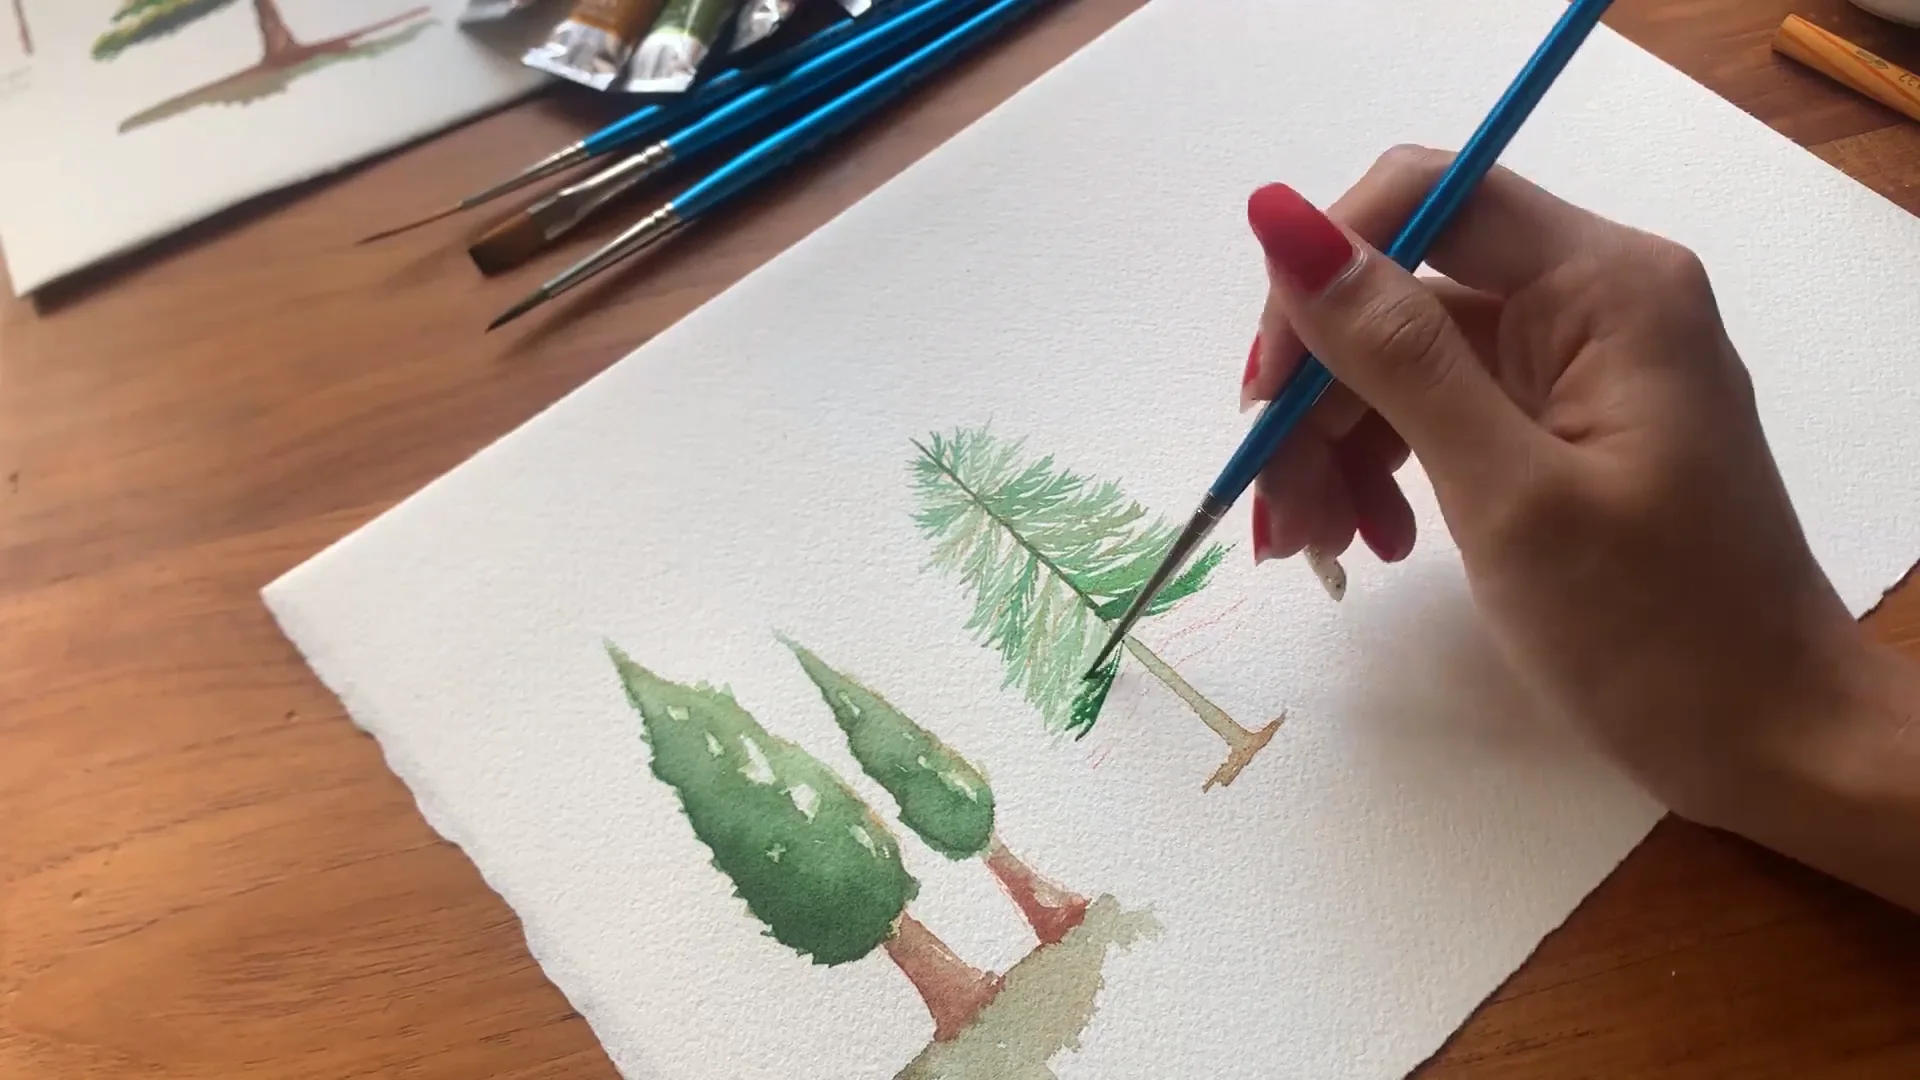 Add More Layers To The Pine Tree